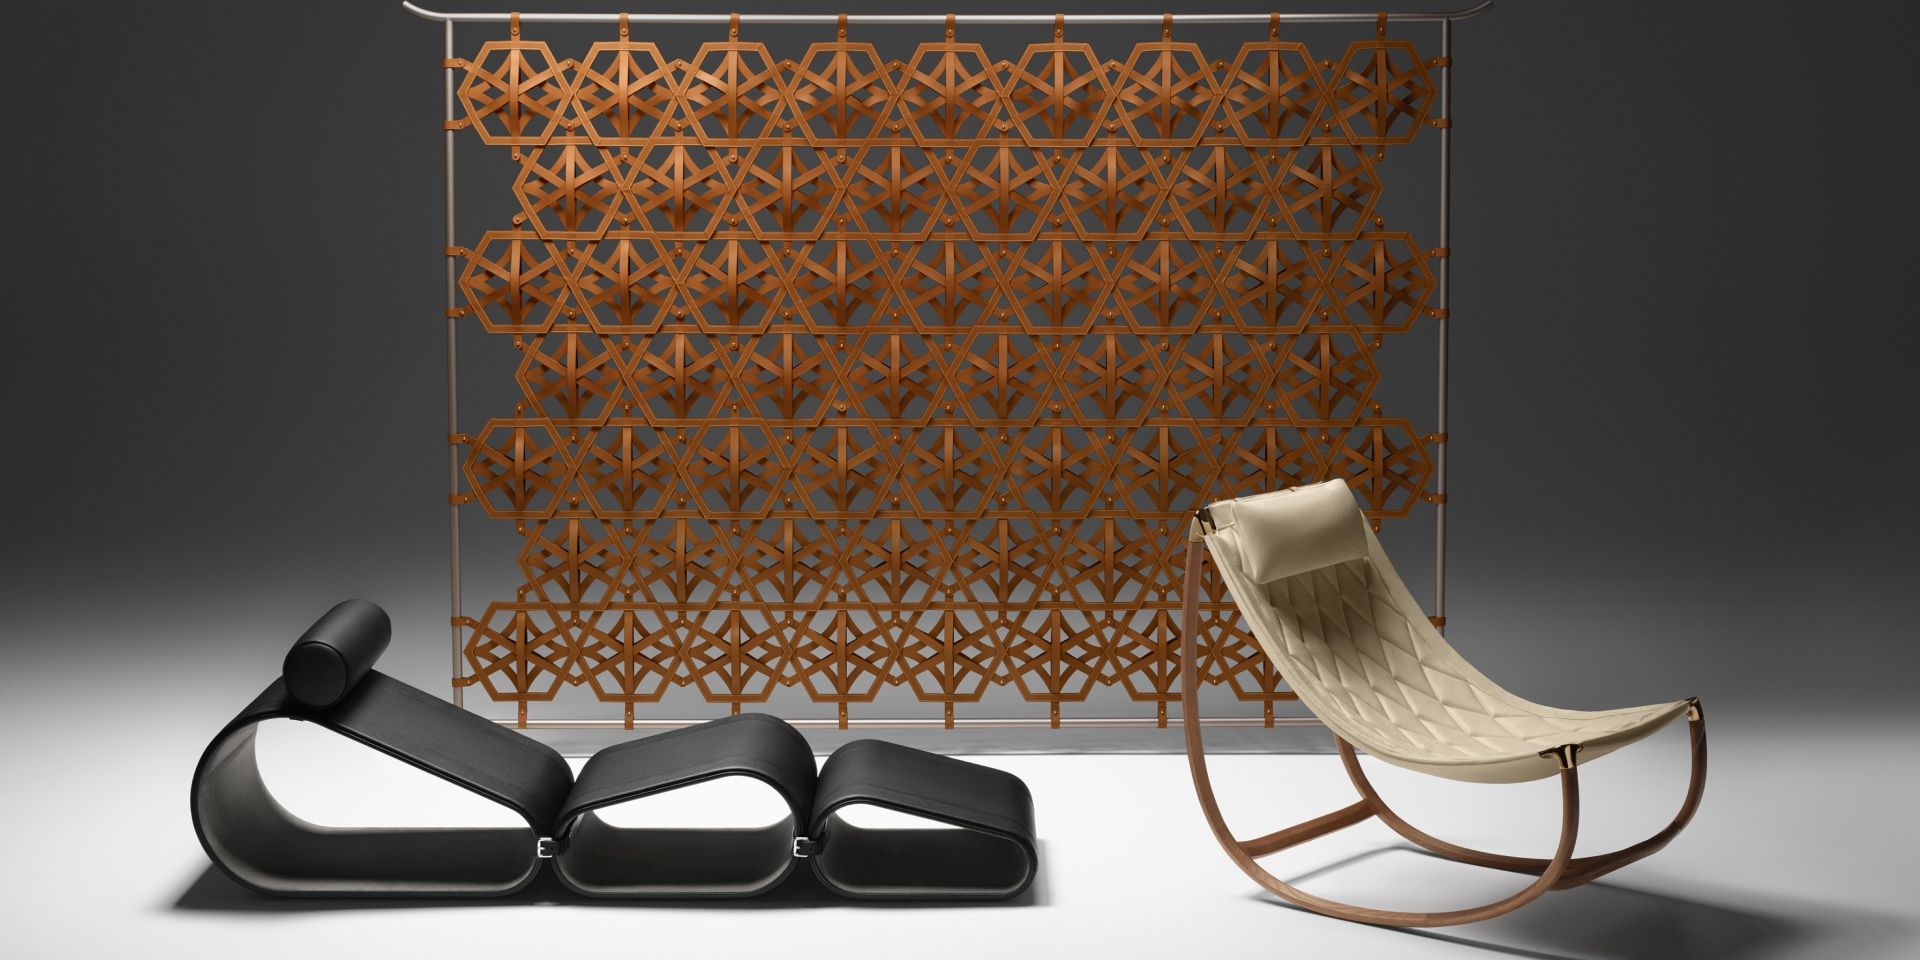 The Louis Vuitton furniture collection.